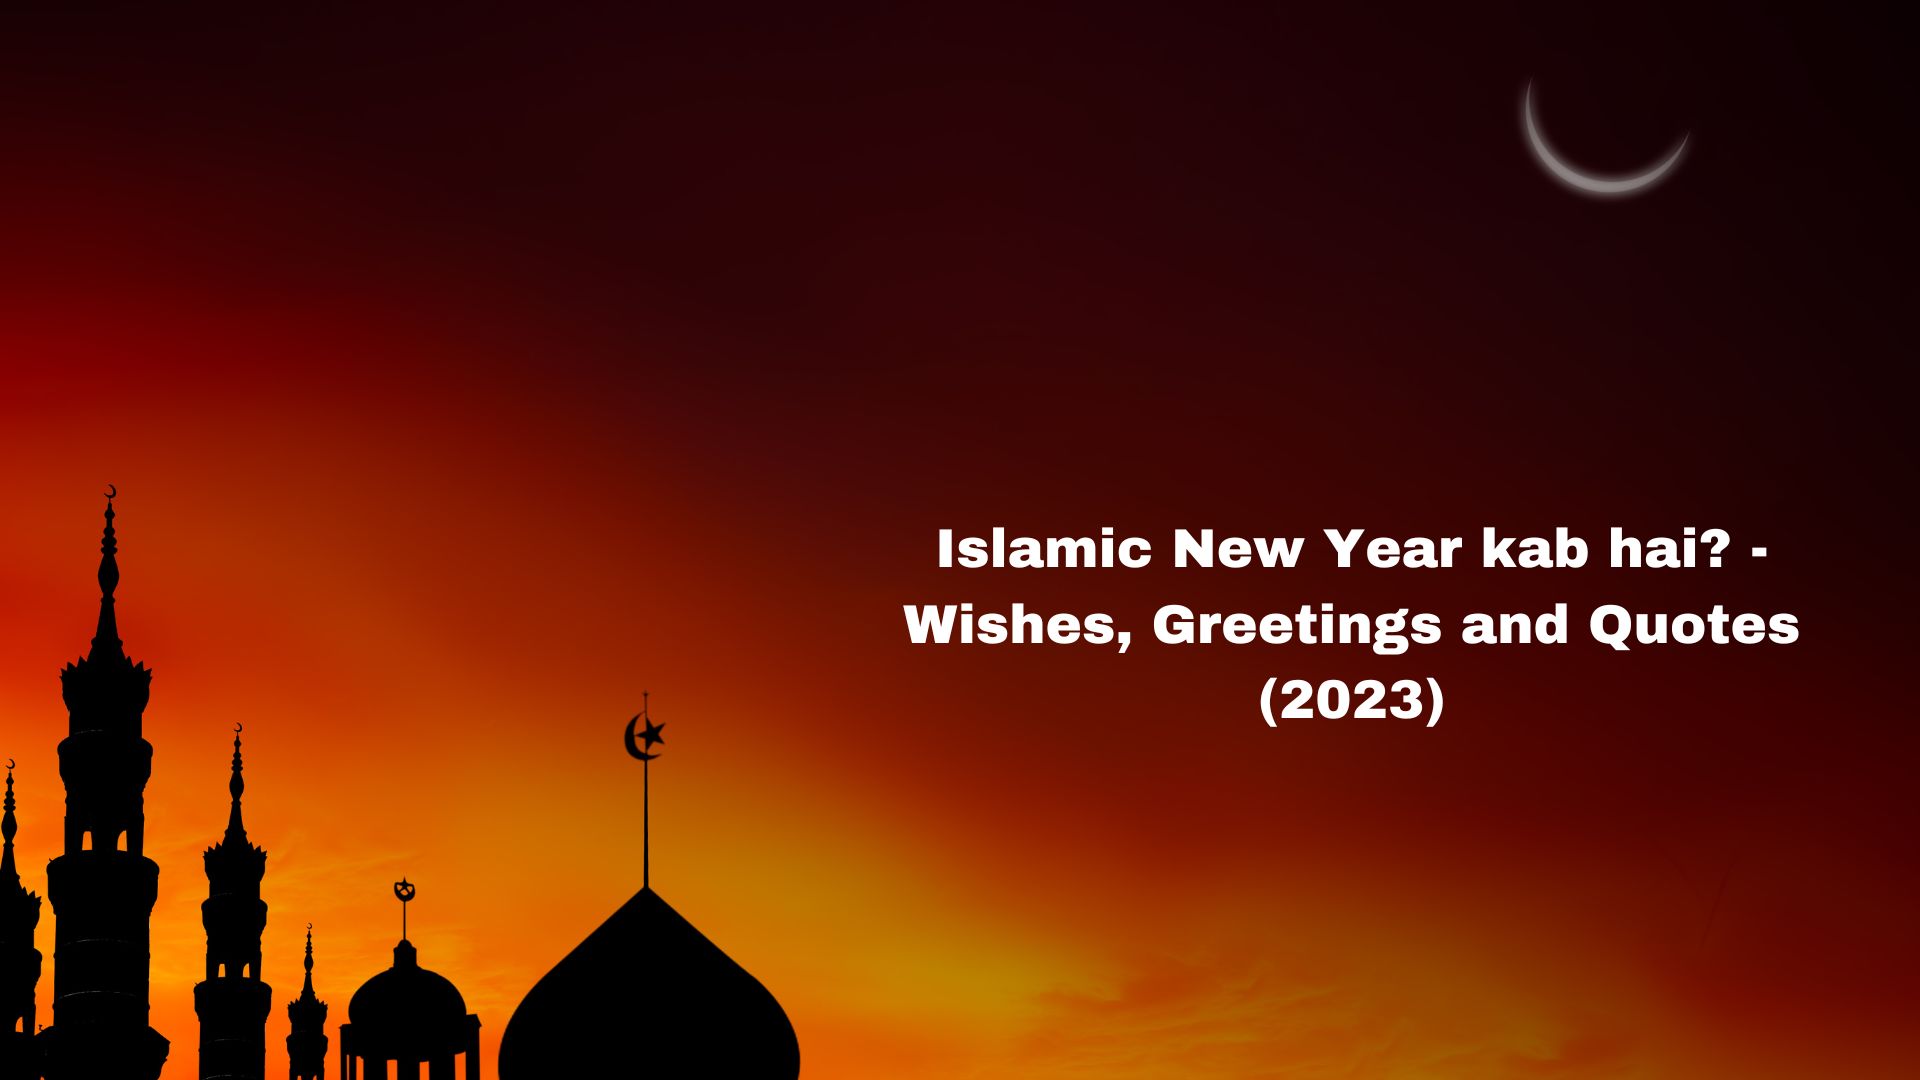 Islamic New Year kab hai? - Wishes, Greetings and Quotes (2023)